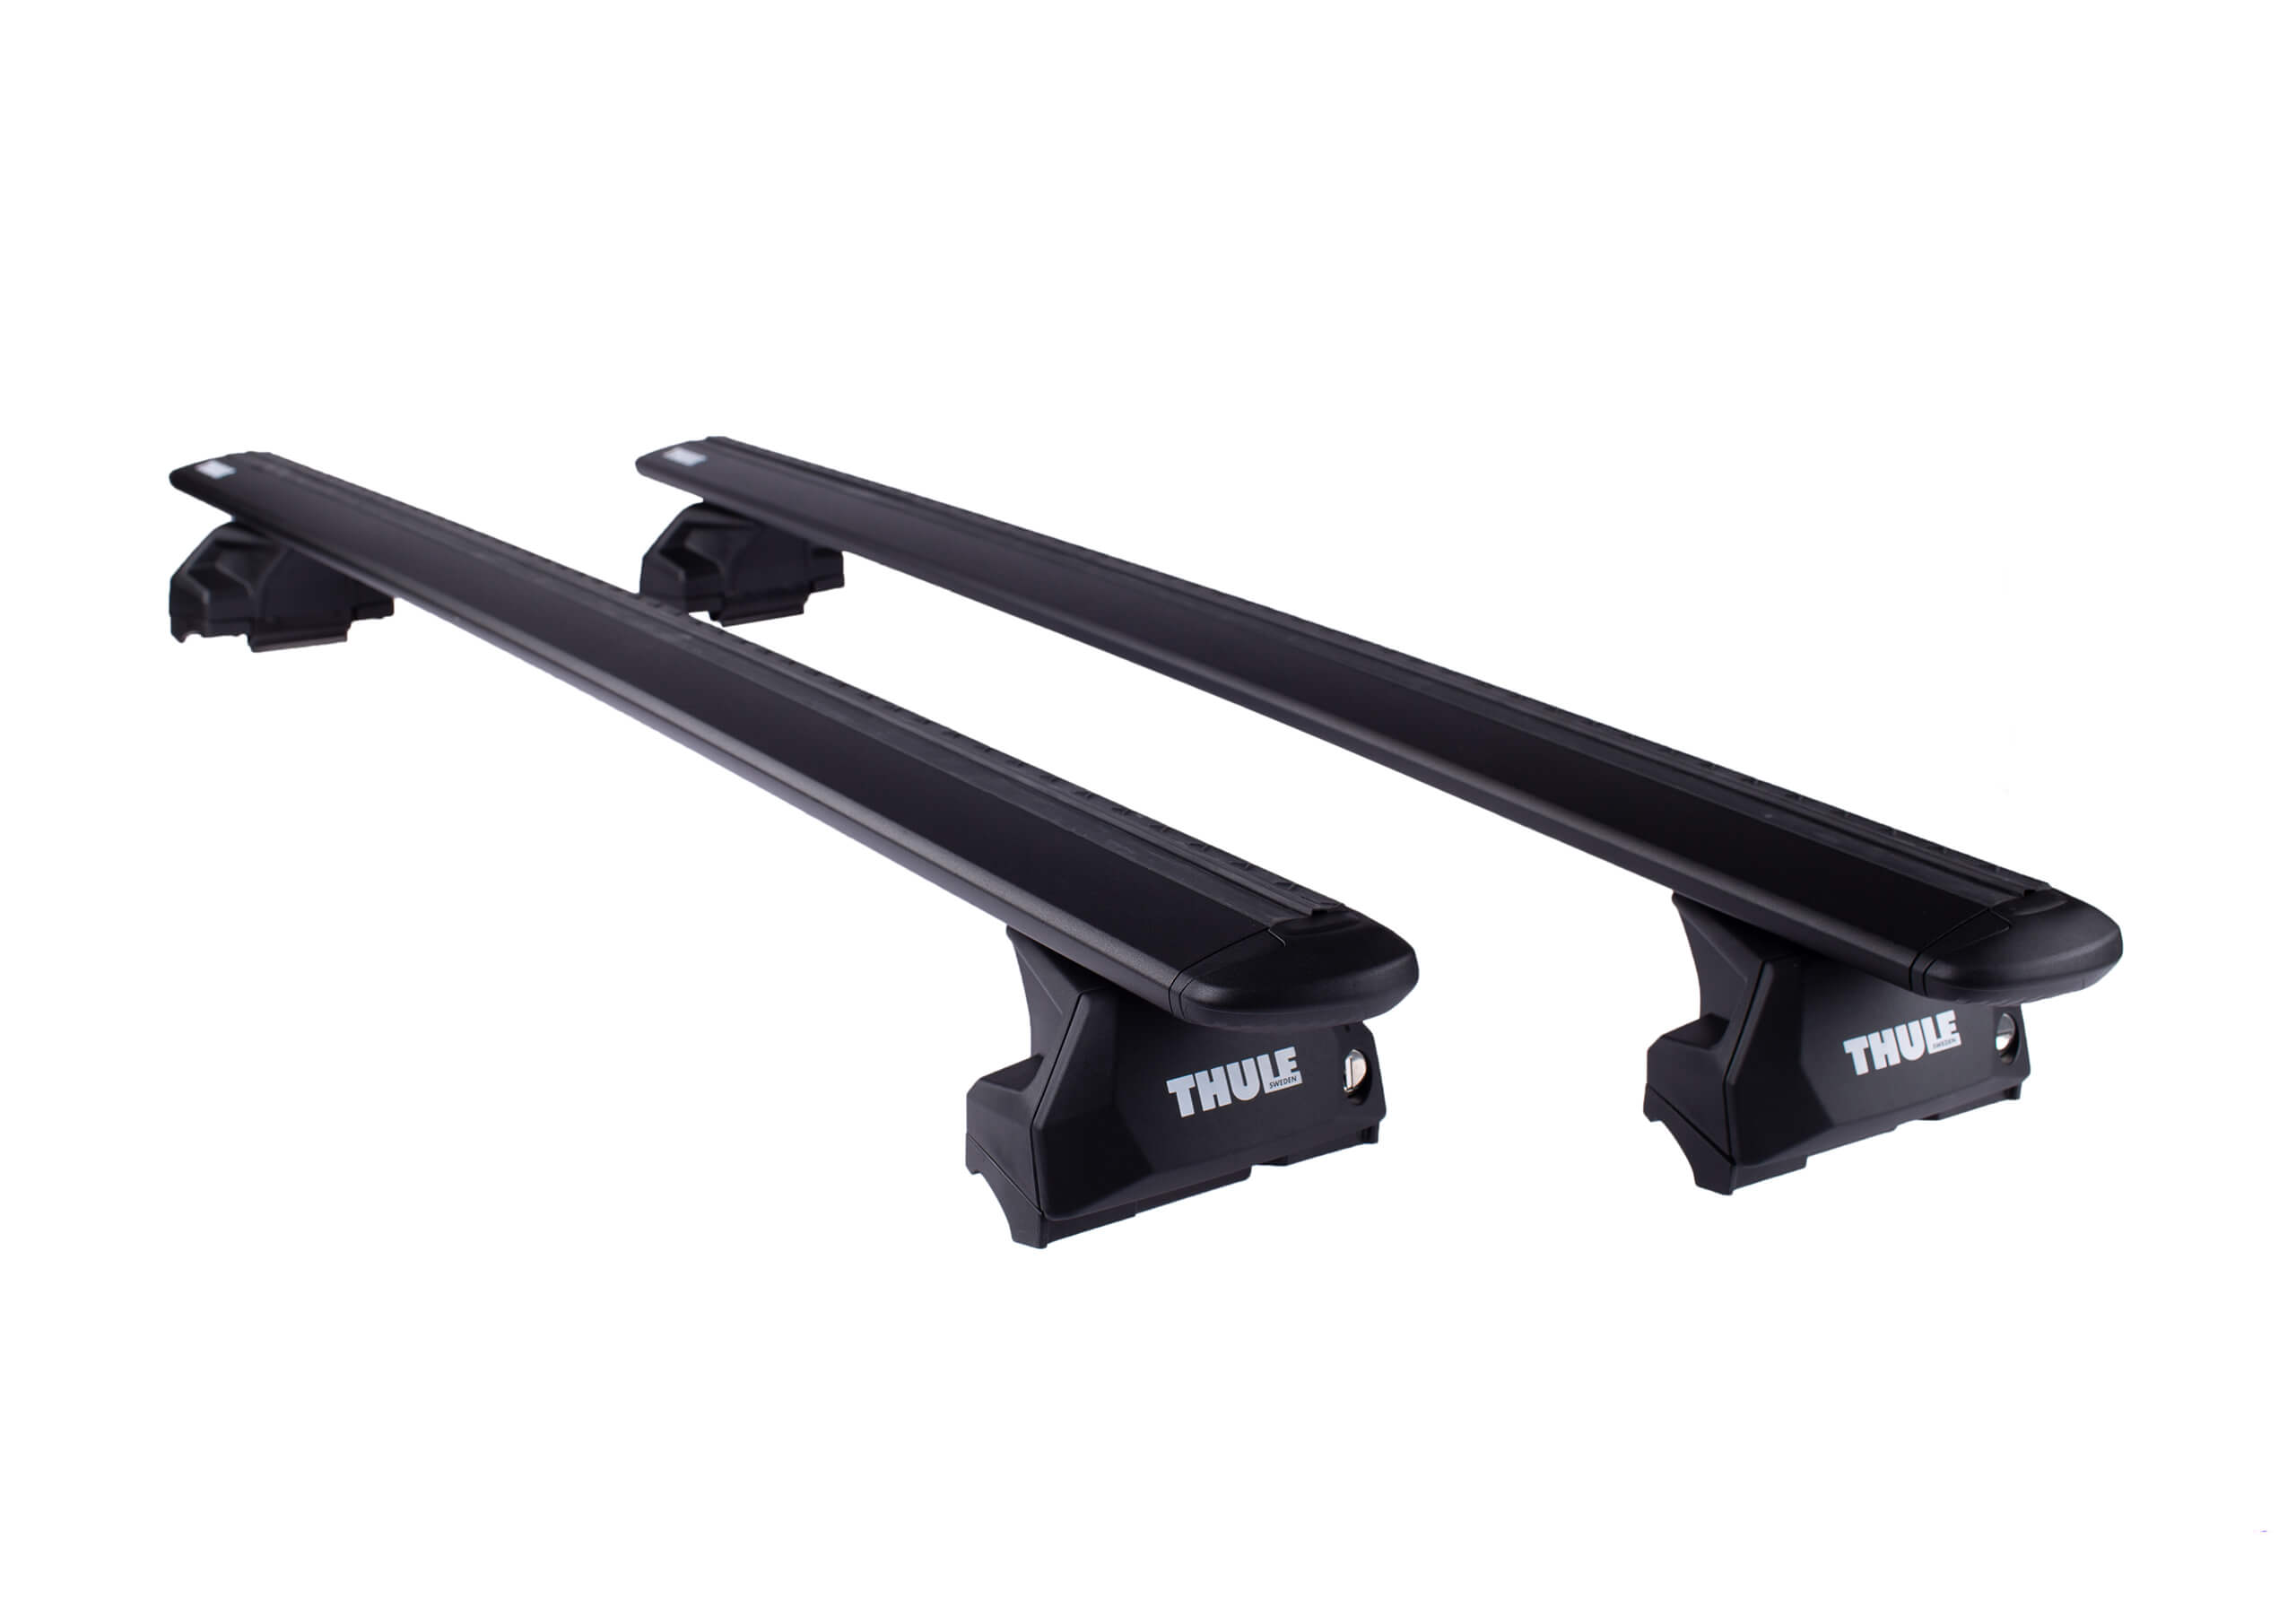 Citroen C4 Grand Picasso (2014 to 2018):Thule black WingBars package - 7106, 7114B, 6011